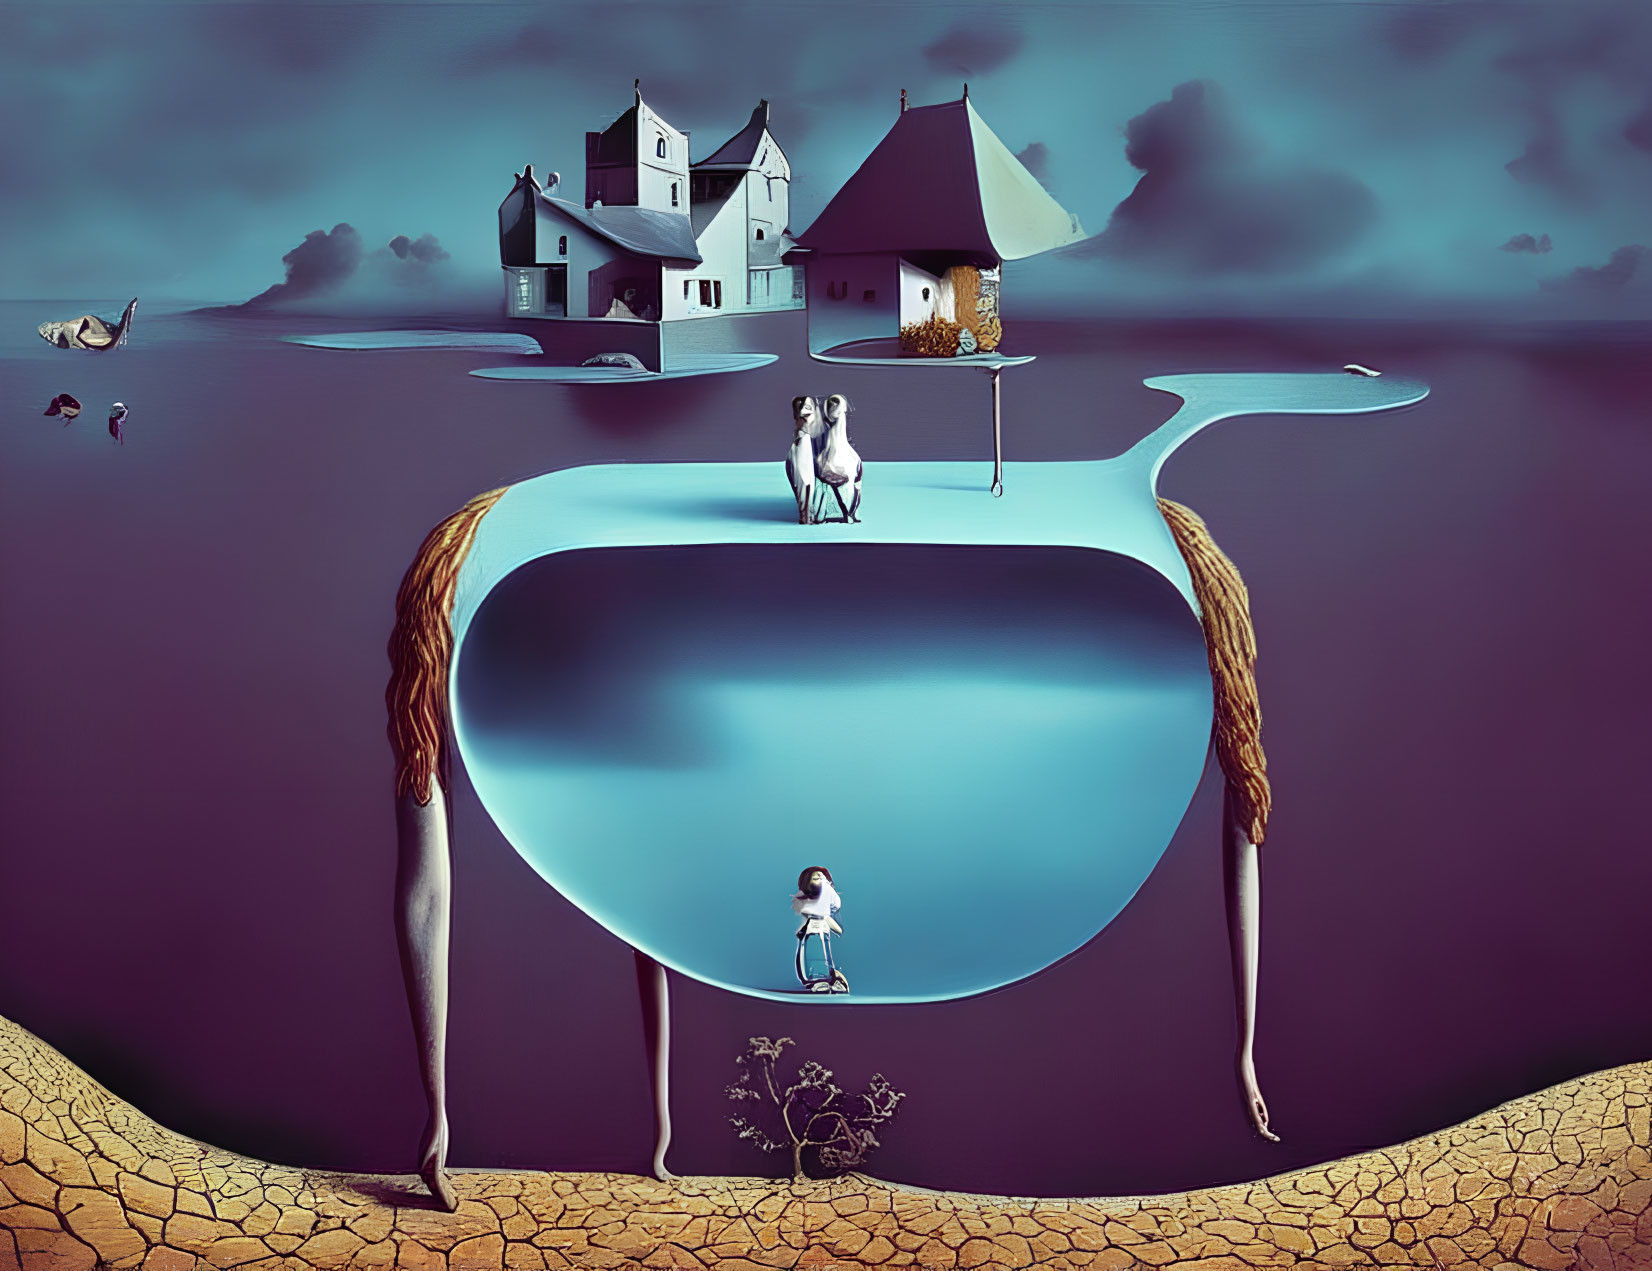 Glass filled with water supports floating island with house and woman staring upwards